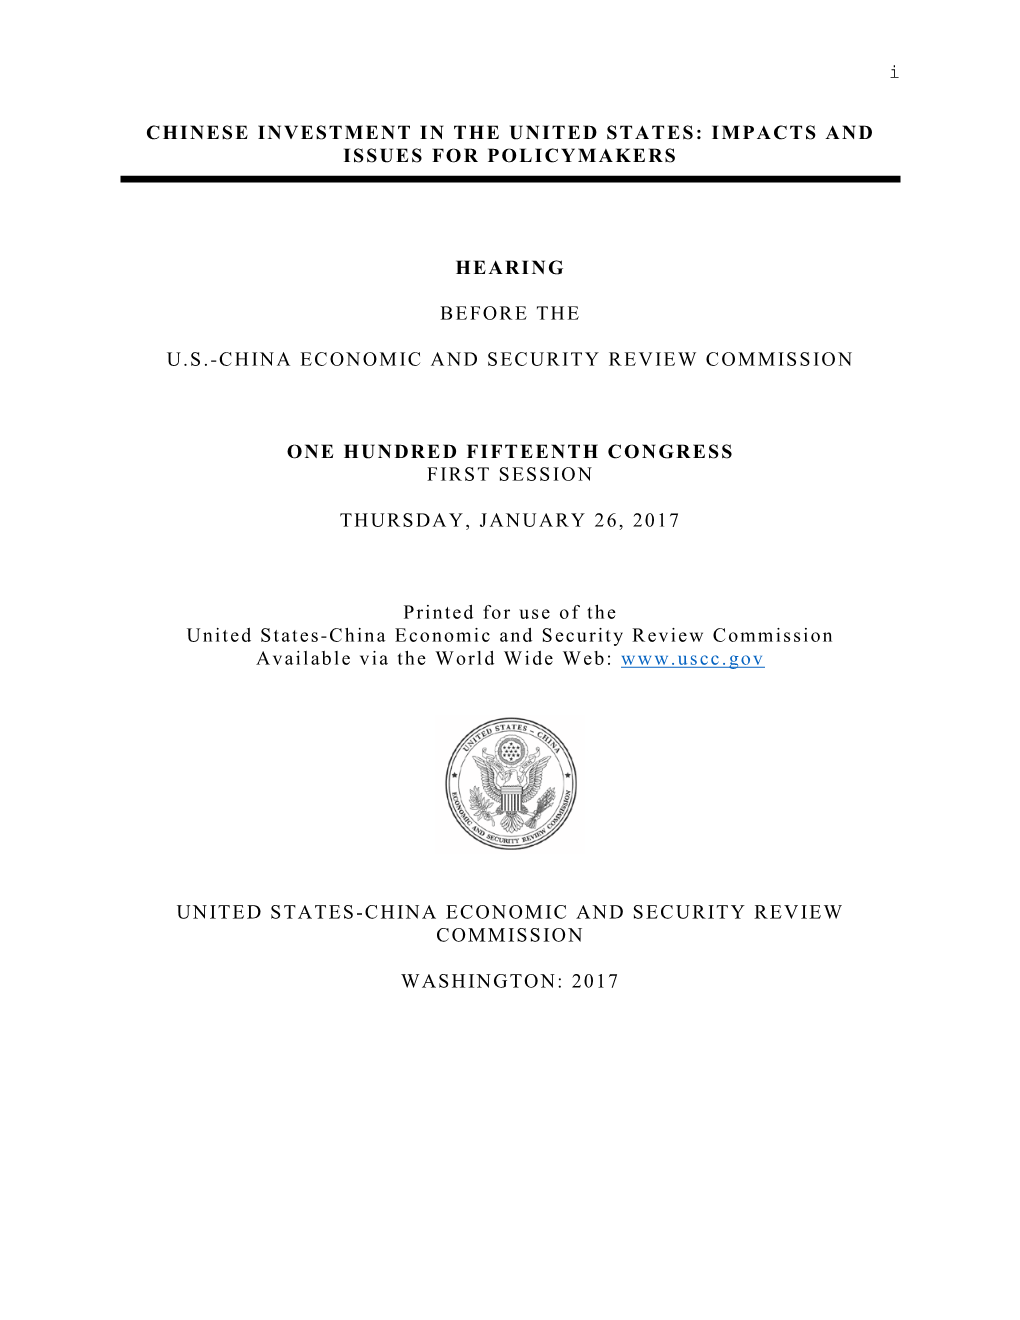 I CHINESE INVESTMENT in the UNITED STATES: IMPACTS AND